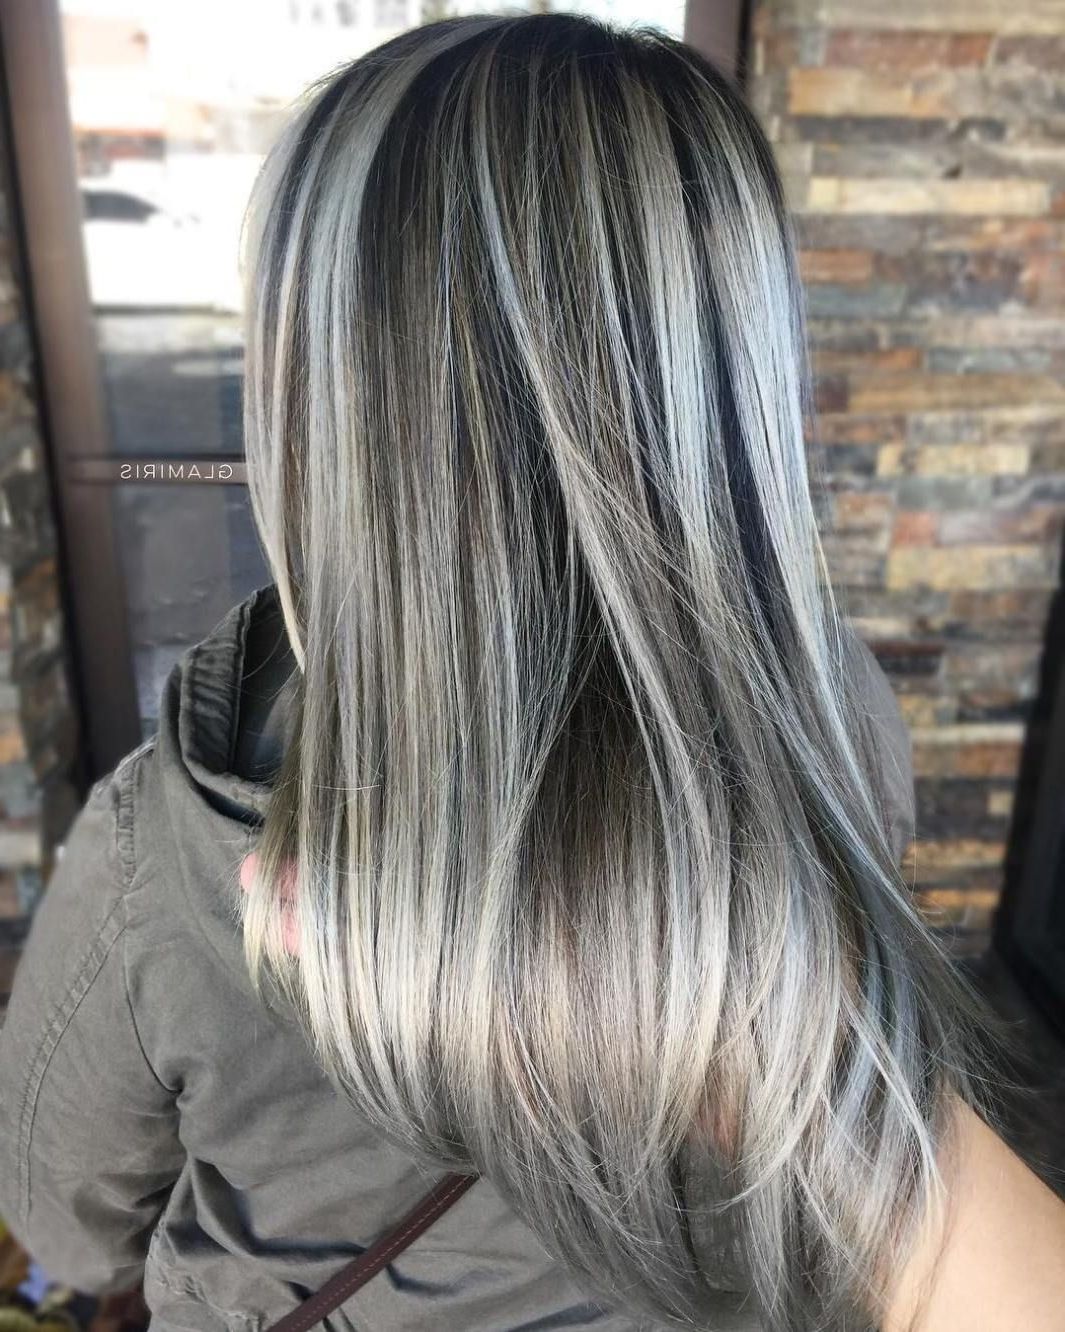 45 Shades Of Grey: Silver And White Highlights For Eternal Youth In Recent Dark Brown Hair Hairstyles With Silver Blonde Highlights (View 1 of 20)